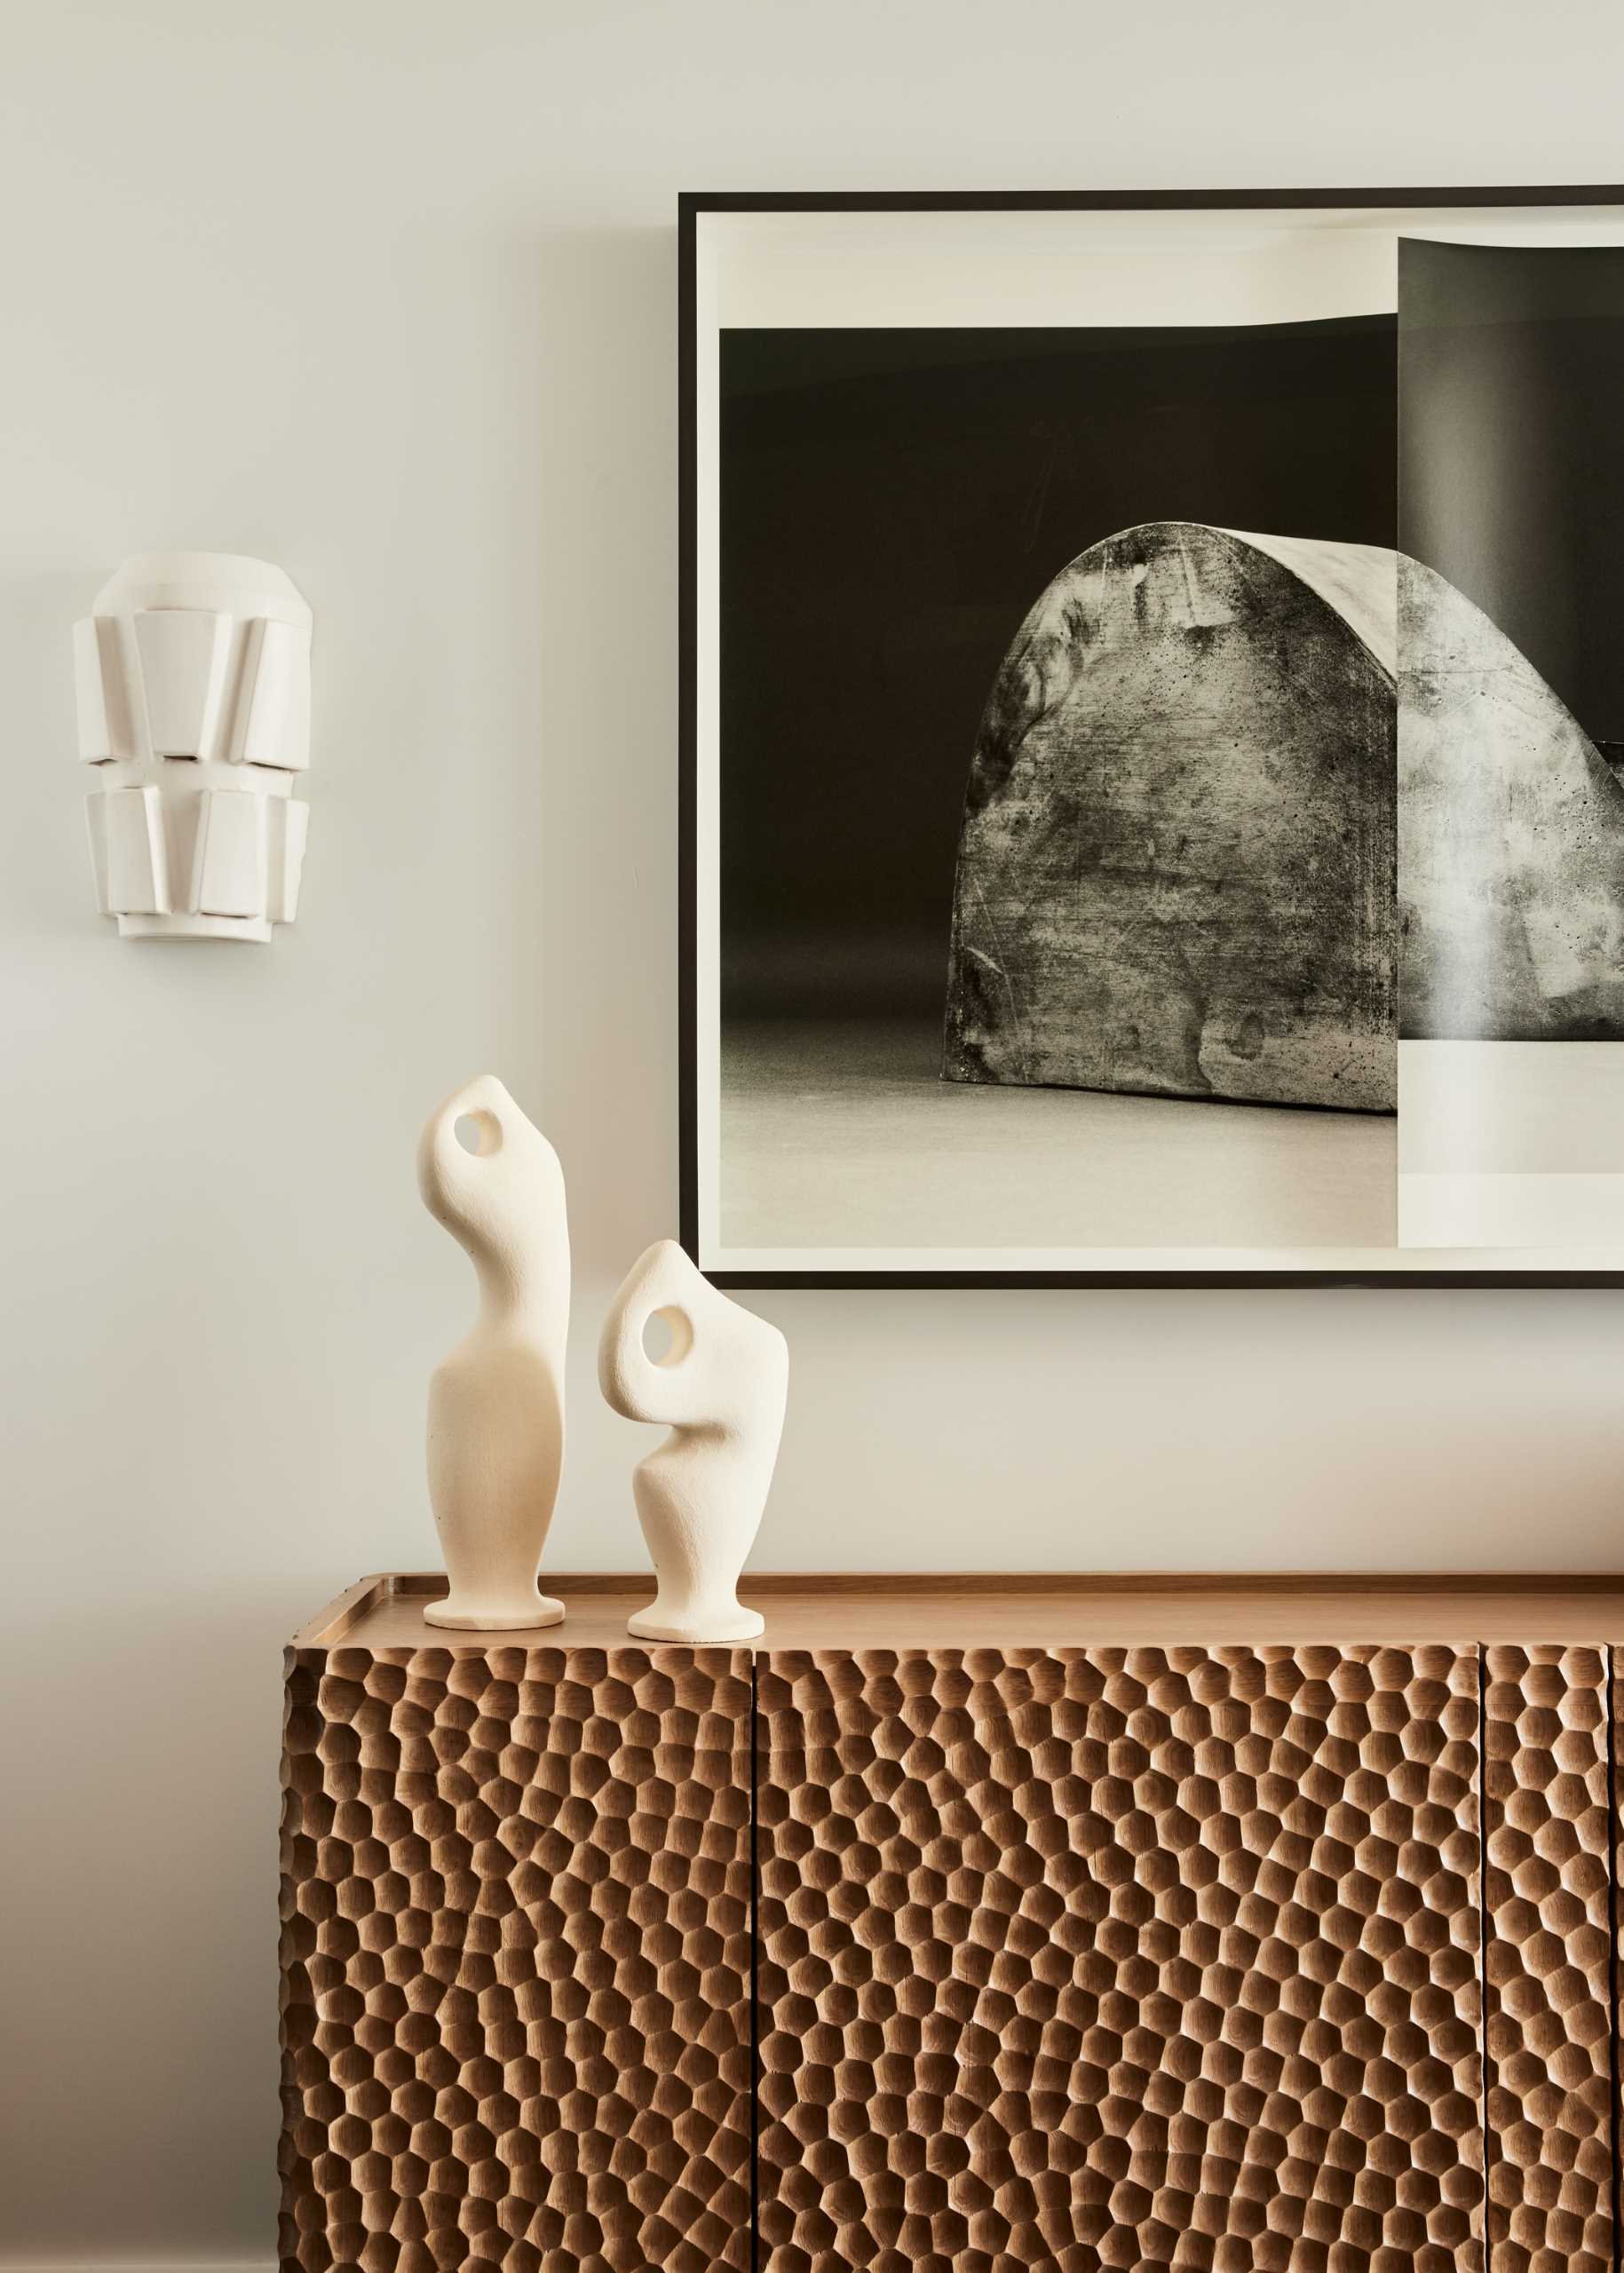 A gouged wood credenza has Erin Schirreff art hanging above and ceramic sconces from The Invisible Collection.